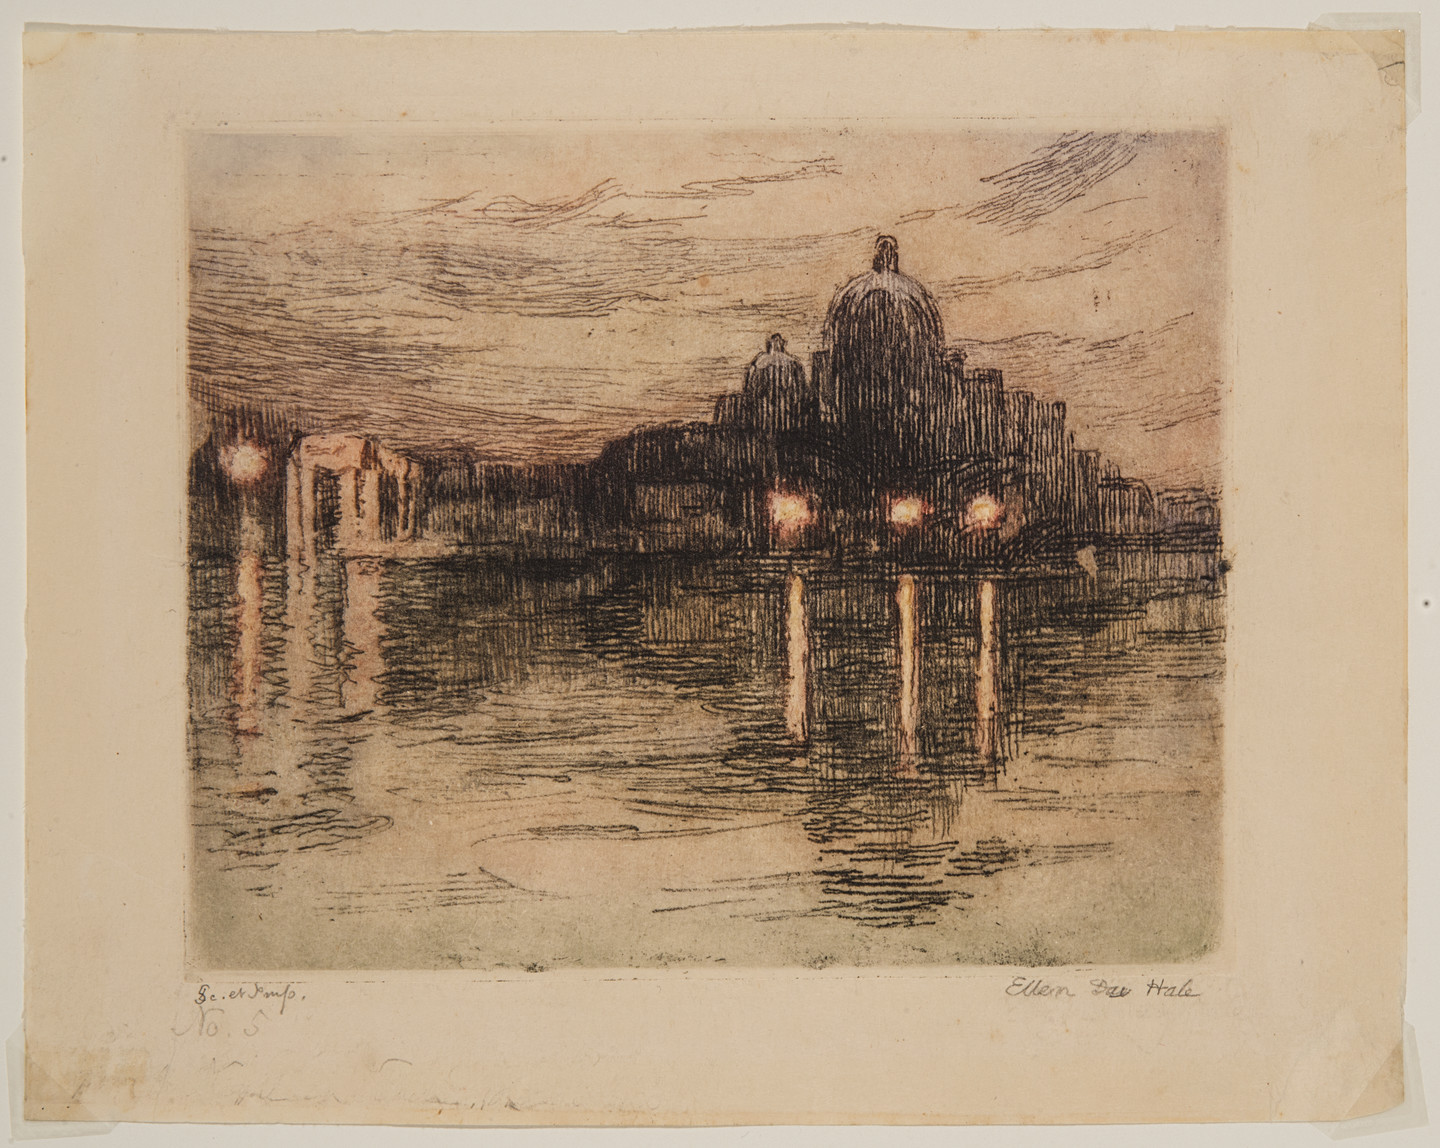 A print with black ink and light washes of color depicting the skyline of a church and other buildings. The shape of the buildings reflect in the water below them.